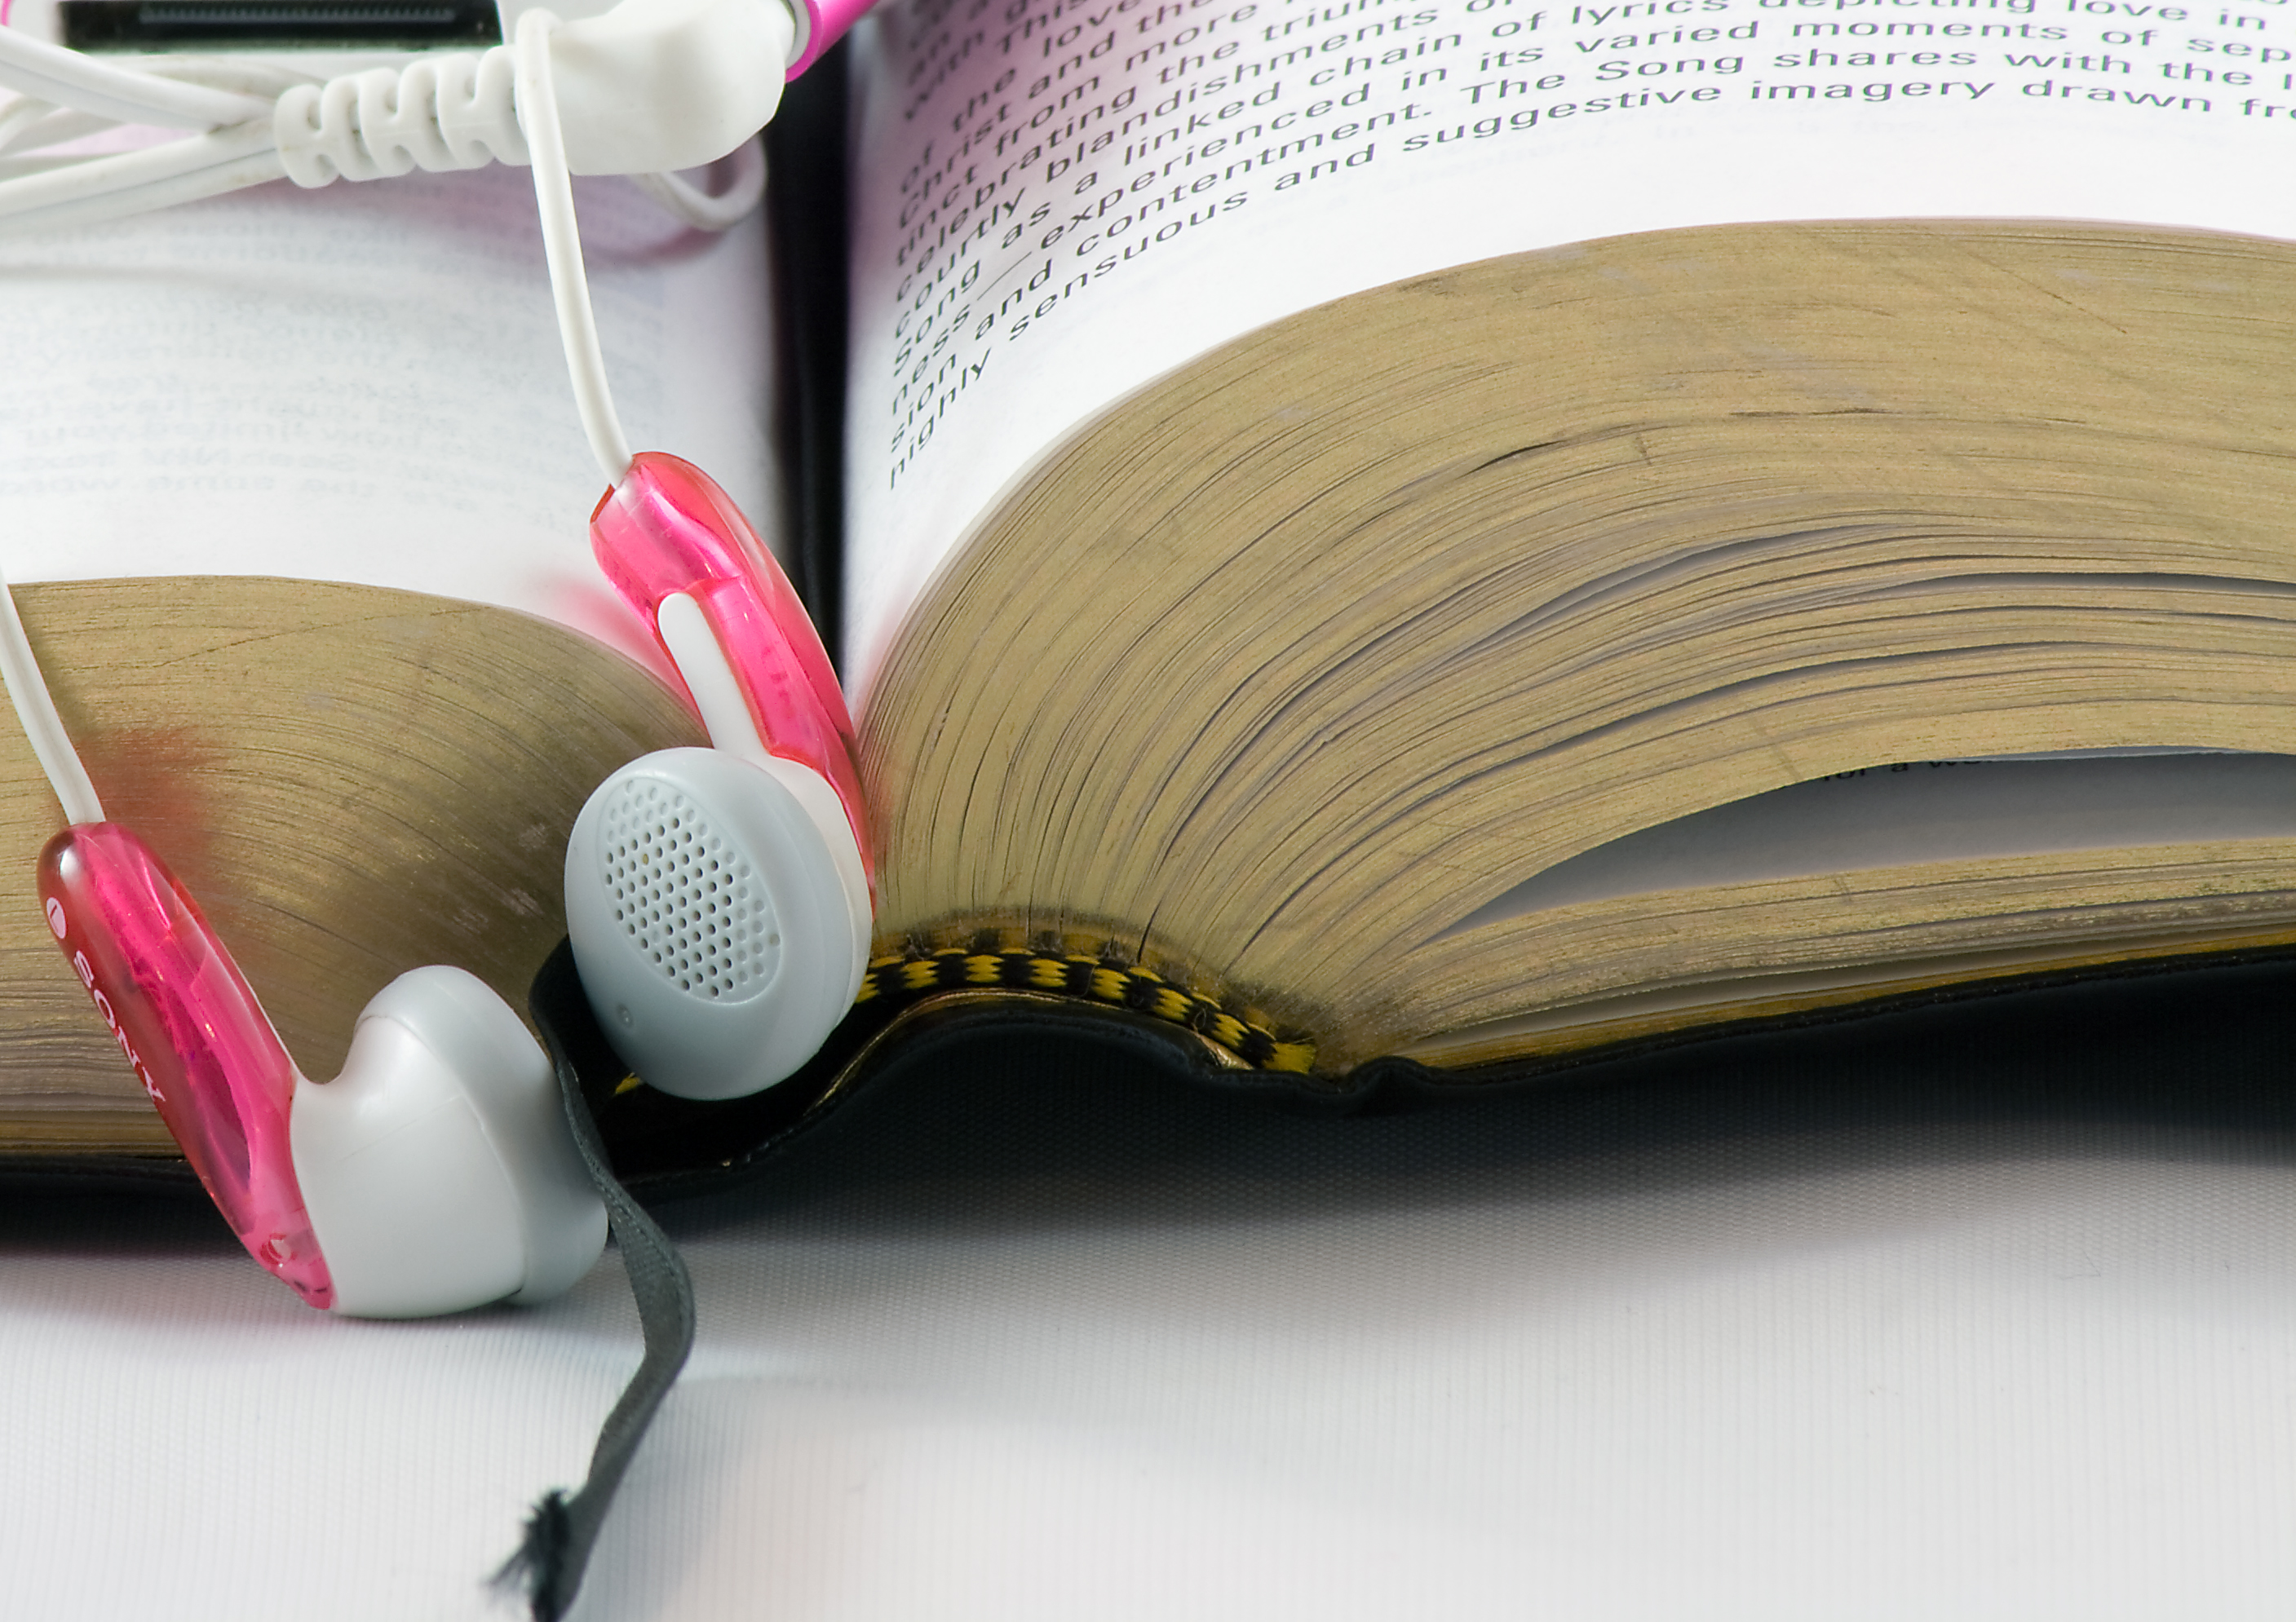 Book-a-holic: Do you listen to music while reading? What kind of ...